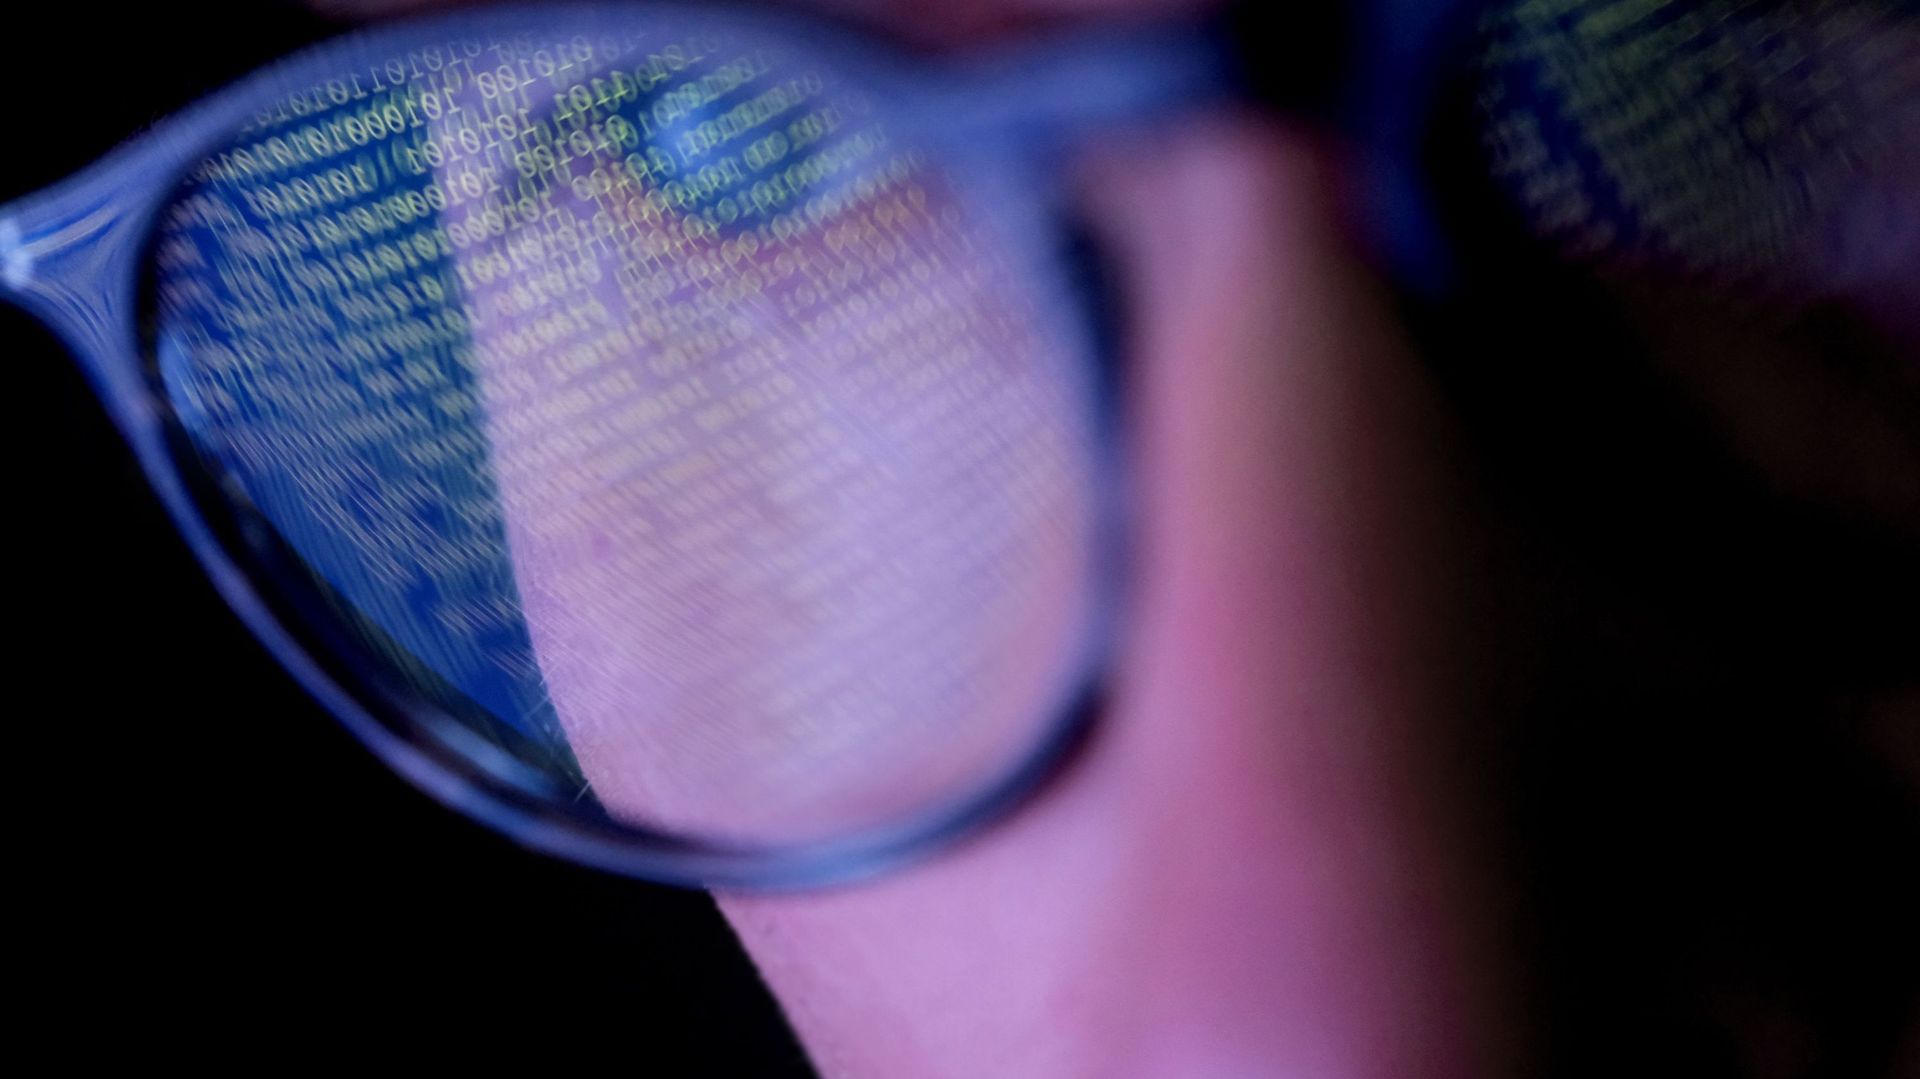 A person with glasses in a dark room looking at computer screen that&#39;s displaying codes or programming, with reflections on the glasses keeping the subject engrossed in